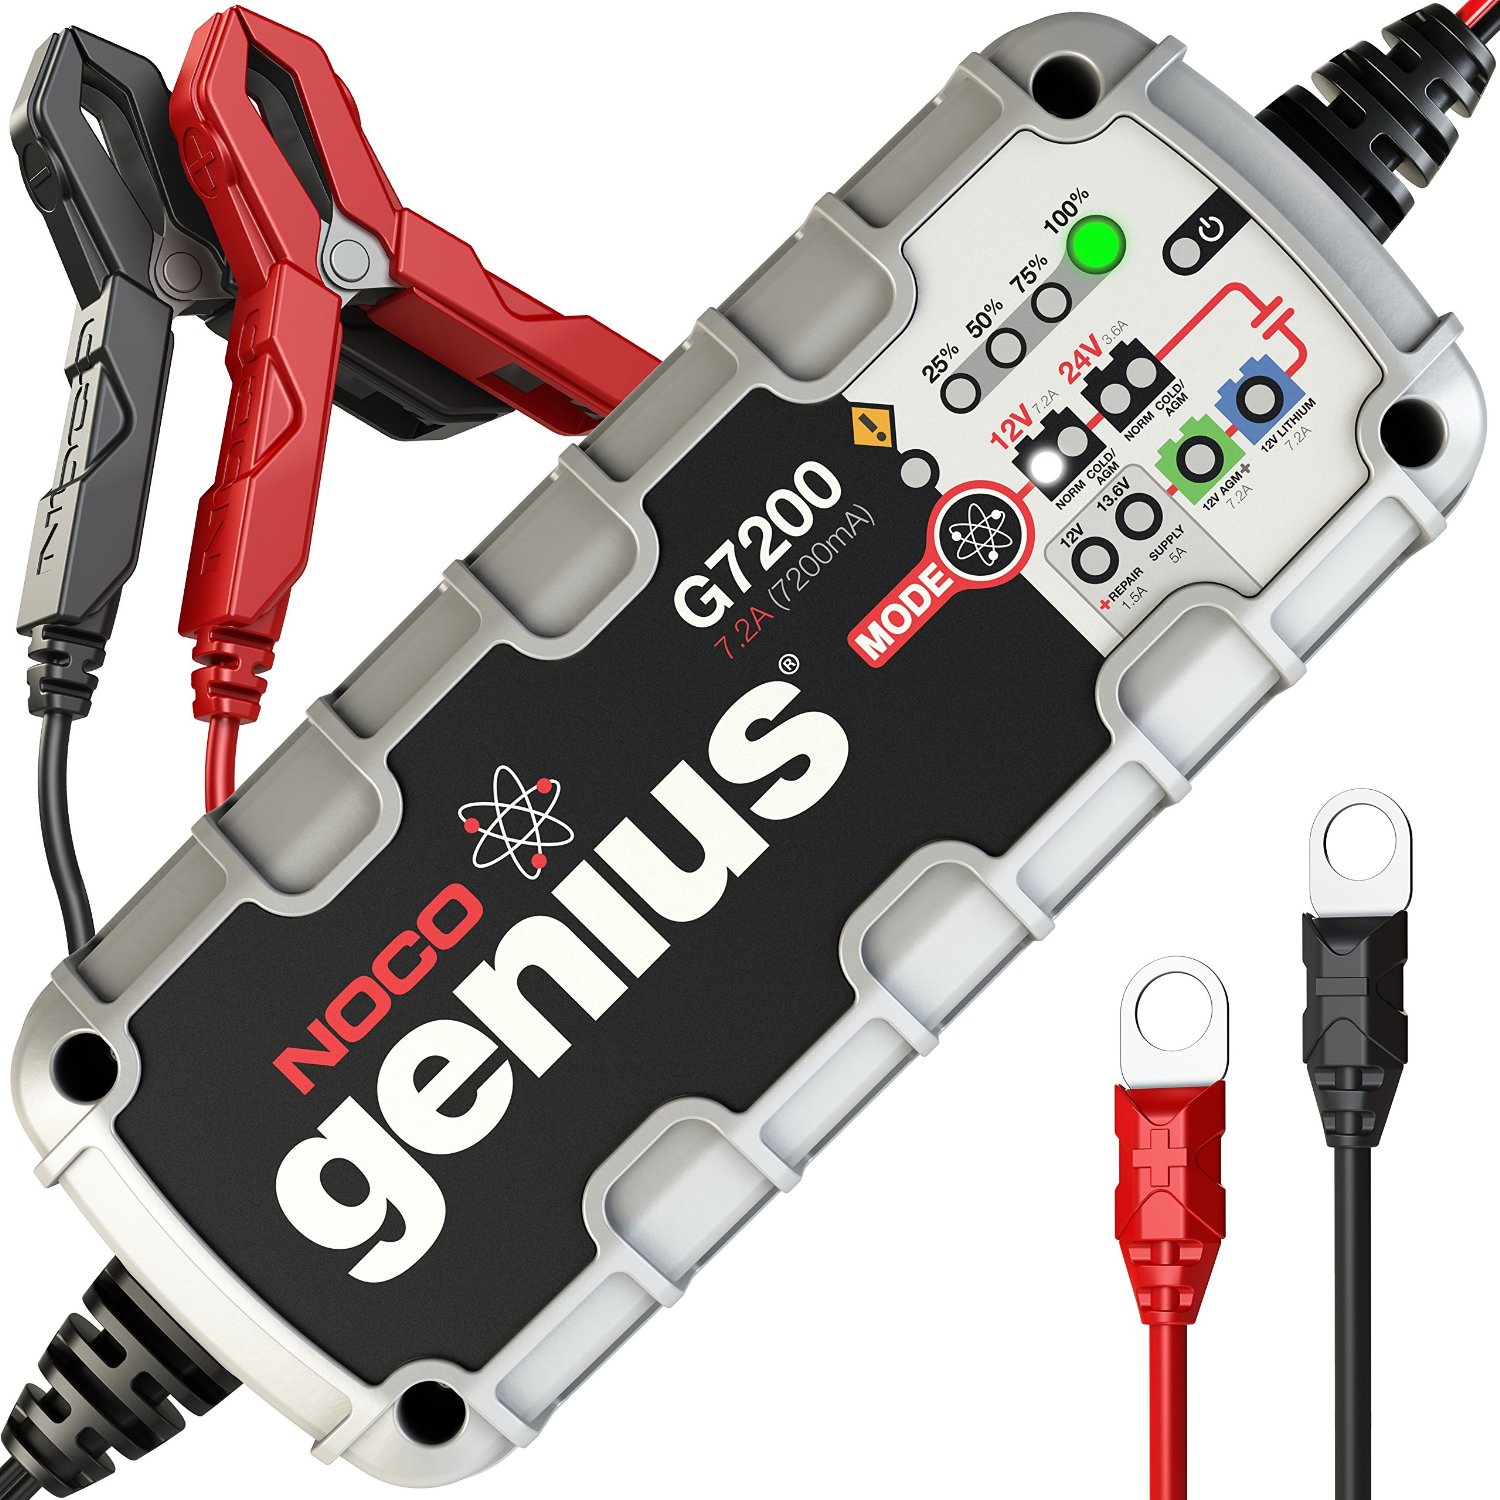 Buy Genius Battery Charger Noco G7200